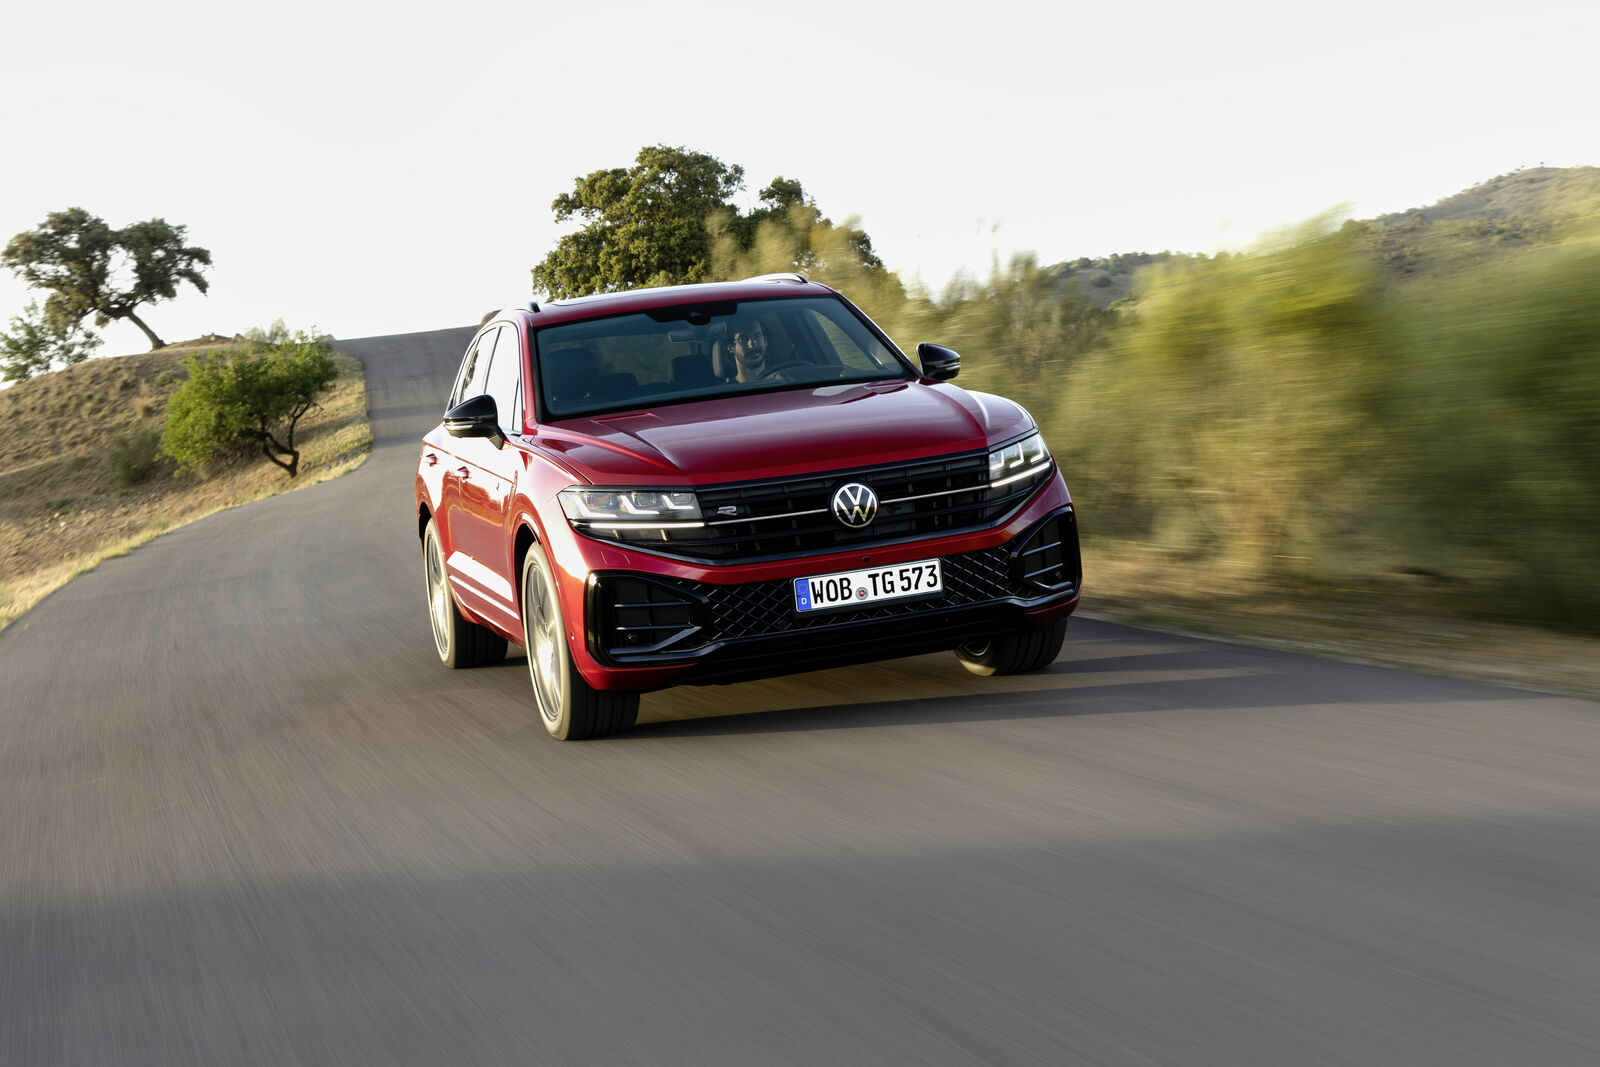 2022 VW Tiguan makes U.S. debut with added tech, classier styling